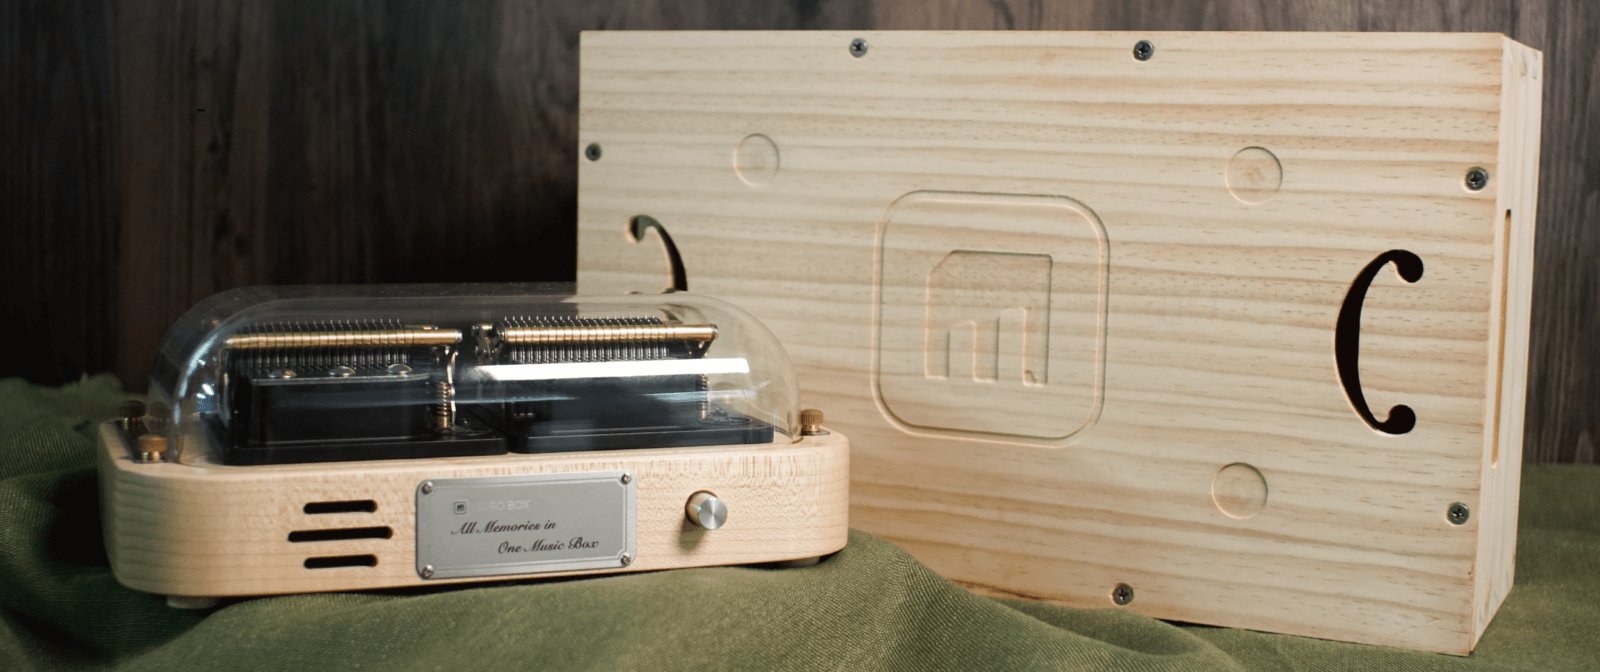 Read more about the article Muro Box-N40 Resonance Box Sound Test; New N40 Metal Plate Designs